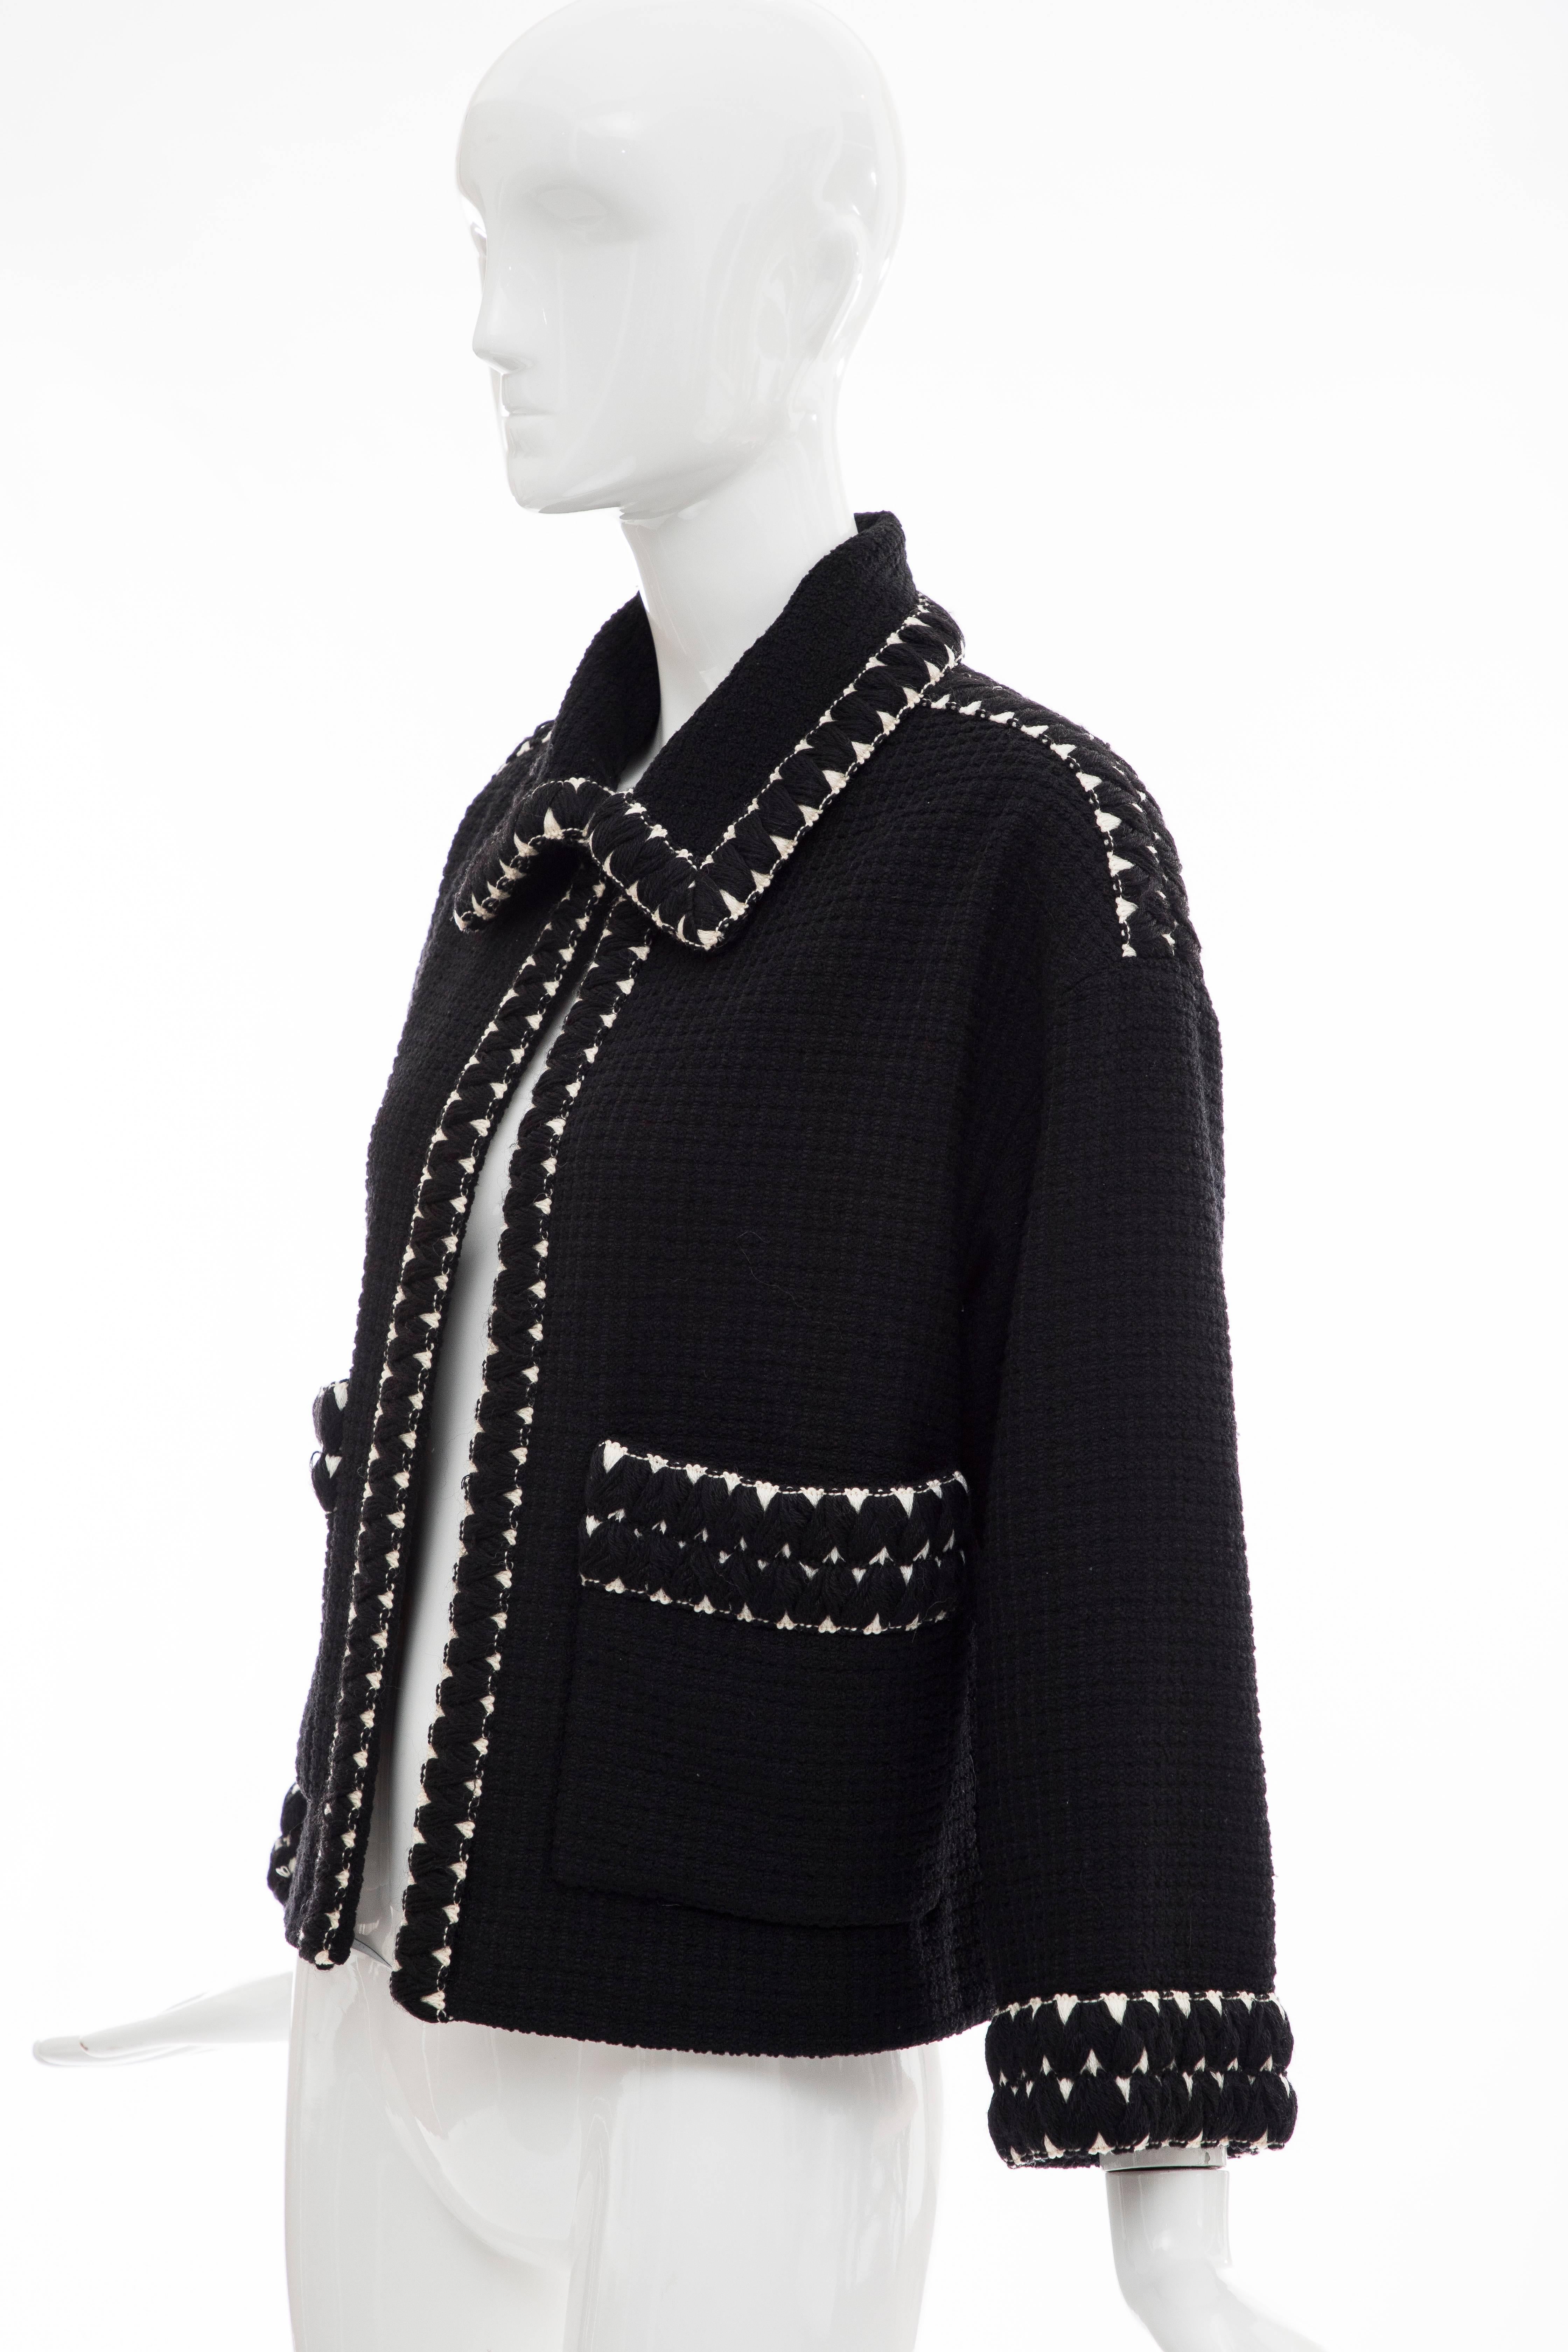 Chanel Black Tweed Jacket With Embroidered Trim, Circa 1980's 4